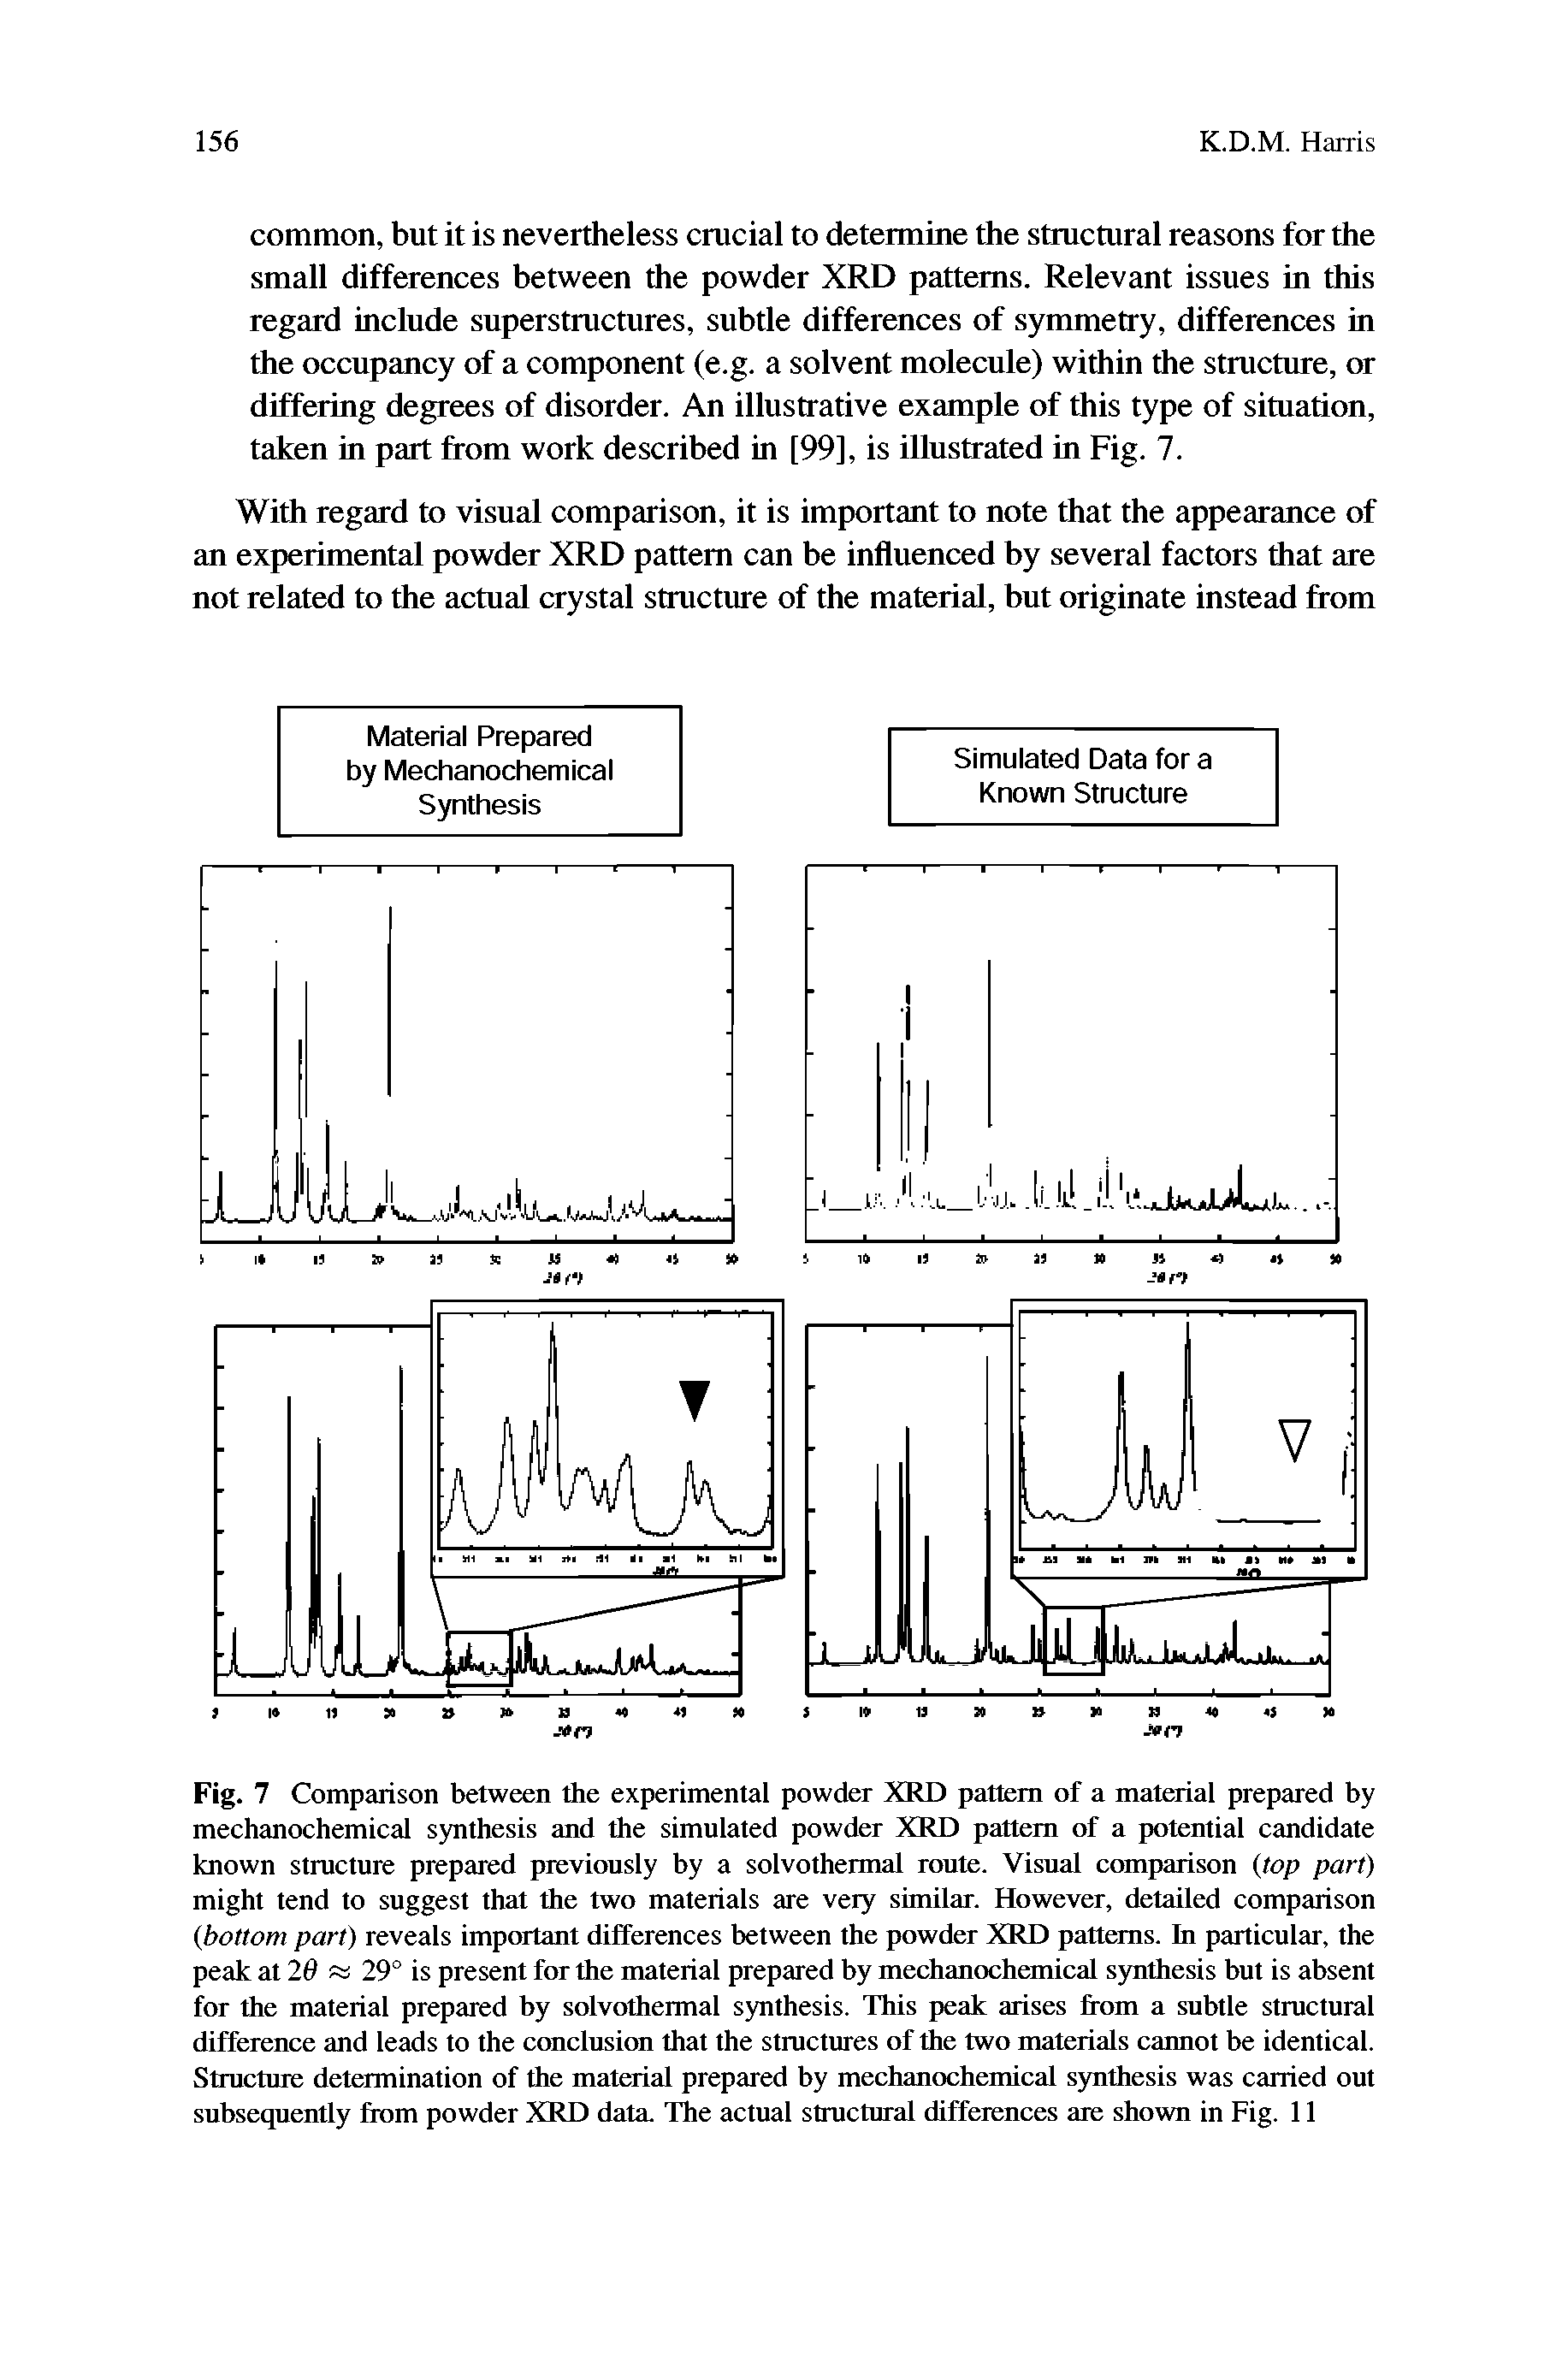 Fig. 7 Comparison between the experimental powder XRD pattern of a material prepared by mechanochemical synthesis and the simulated powder XRD pattern of a potential candidate known structure prepared previously by a solvothermal route. Visual comparison (top part) might tend to suggest that the two materials are very similar. However, detailed comparison (bottom part) reveals important differences between the powder XRD patterns. In particular, the peak at 26 29° is present for the material prepared by mechanochemical synthesis but is absent...